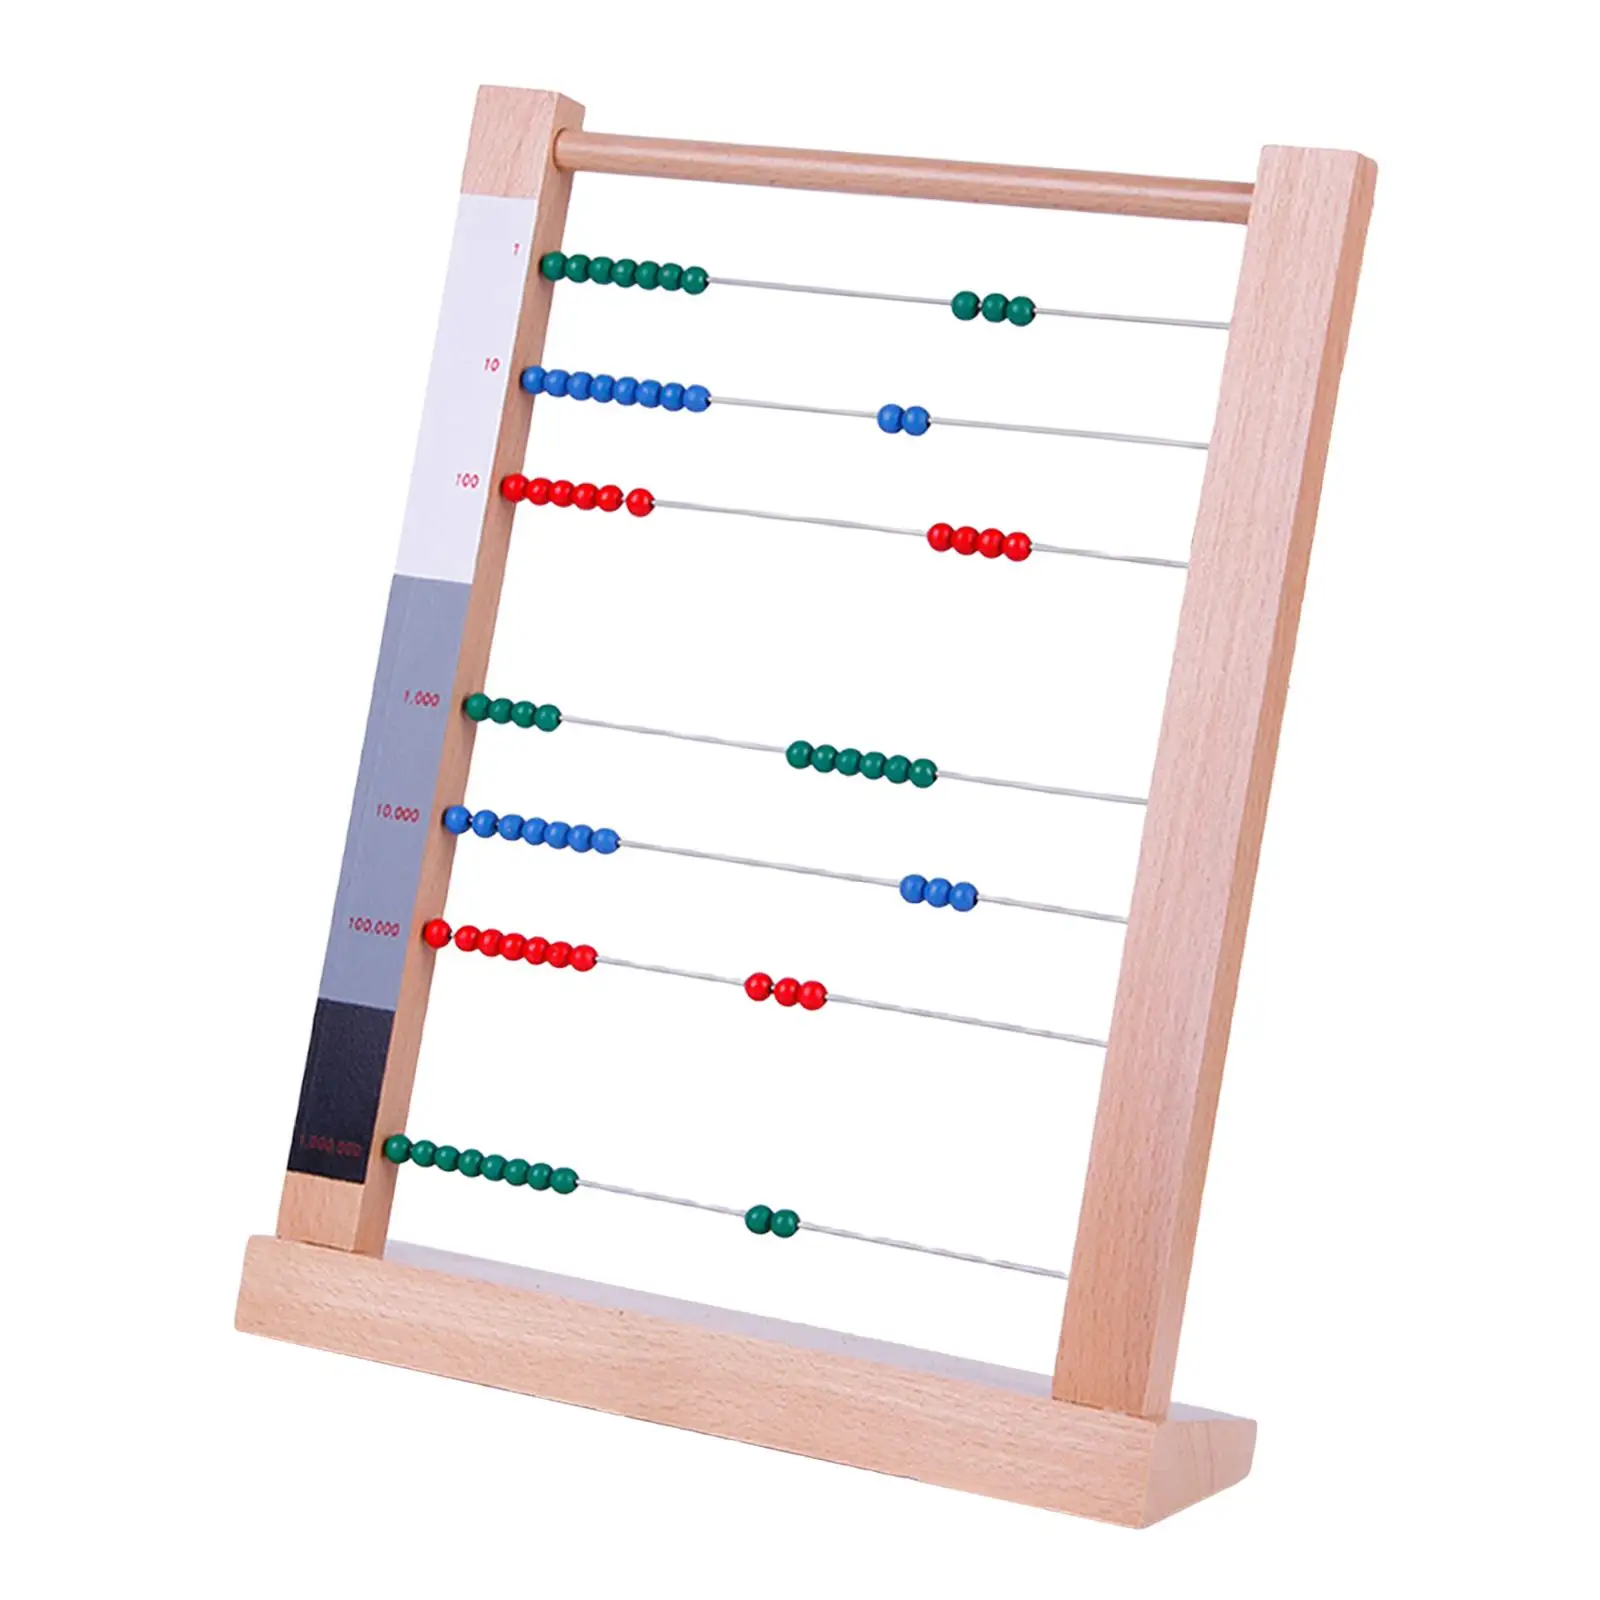 7 Rows Counting Frame Wooden Small Bead Frame for Kids Preschool Elementary